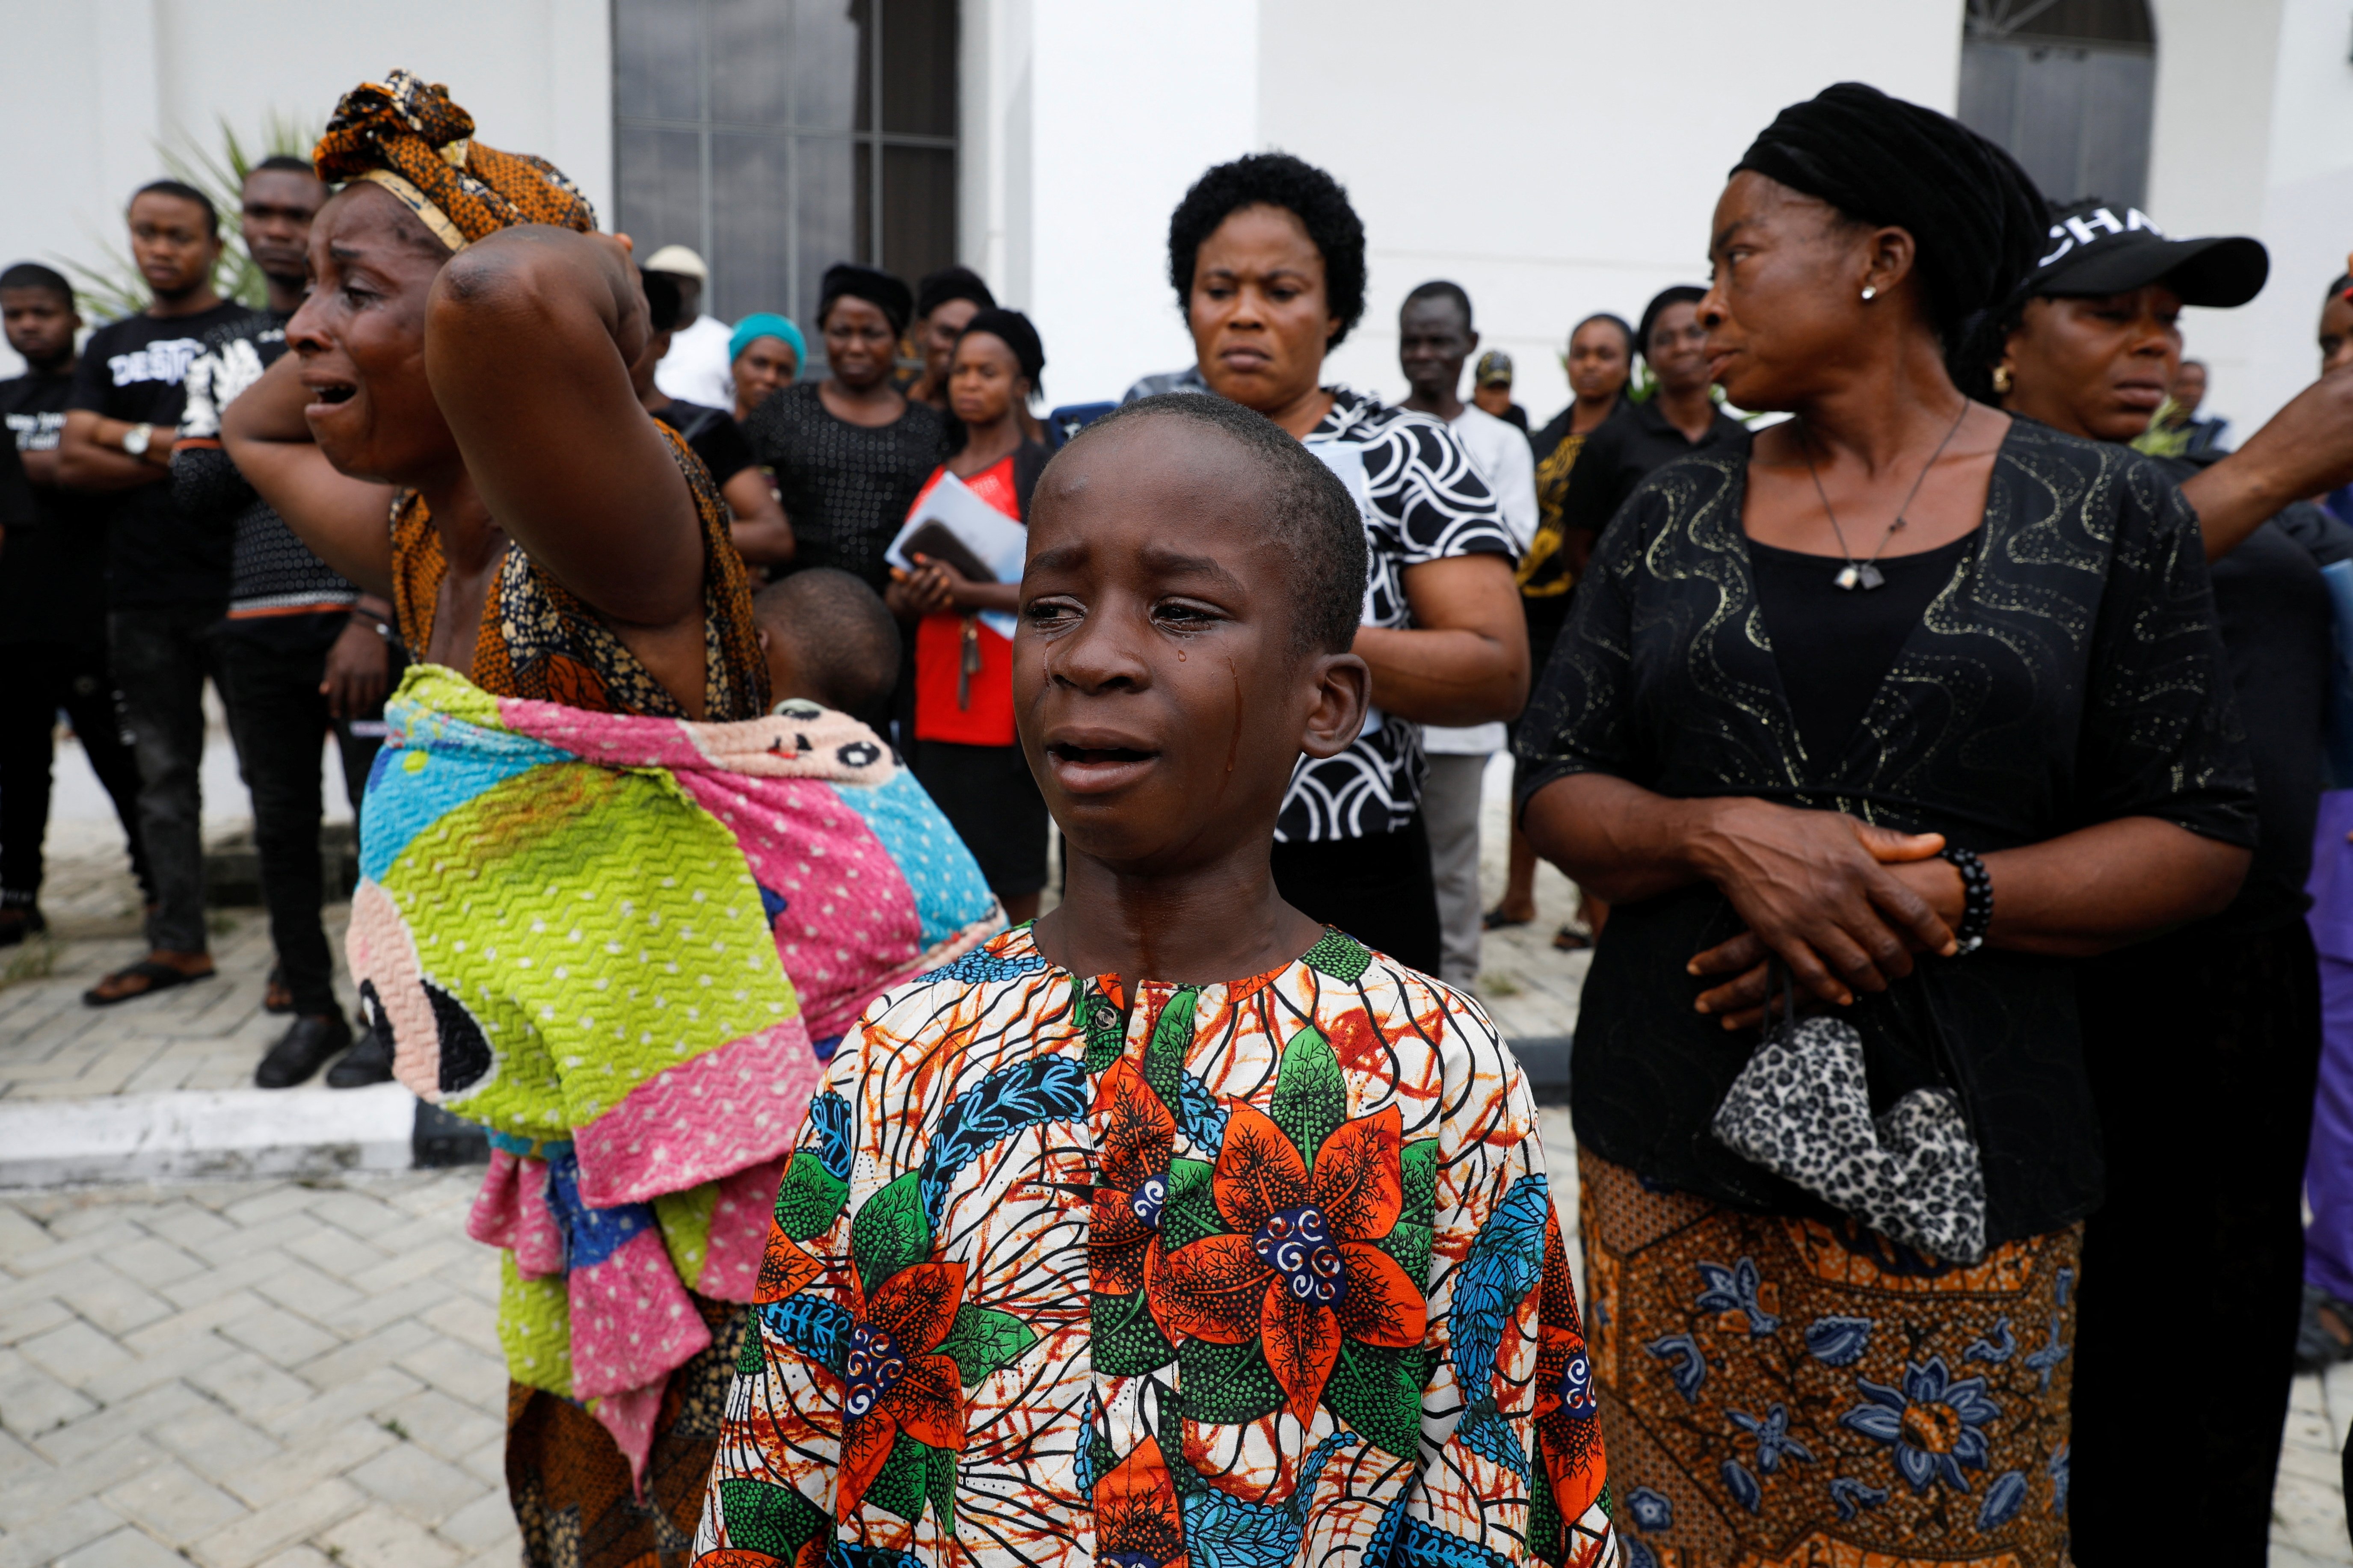 People grieve after a mass memorial service for victims killed in an attack by gunmen during a Sunday mass service at St. Francis Catholic Church in Owo, Ondo, Nigeria, June 17, 2022. (REUTERS PHOTO)